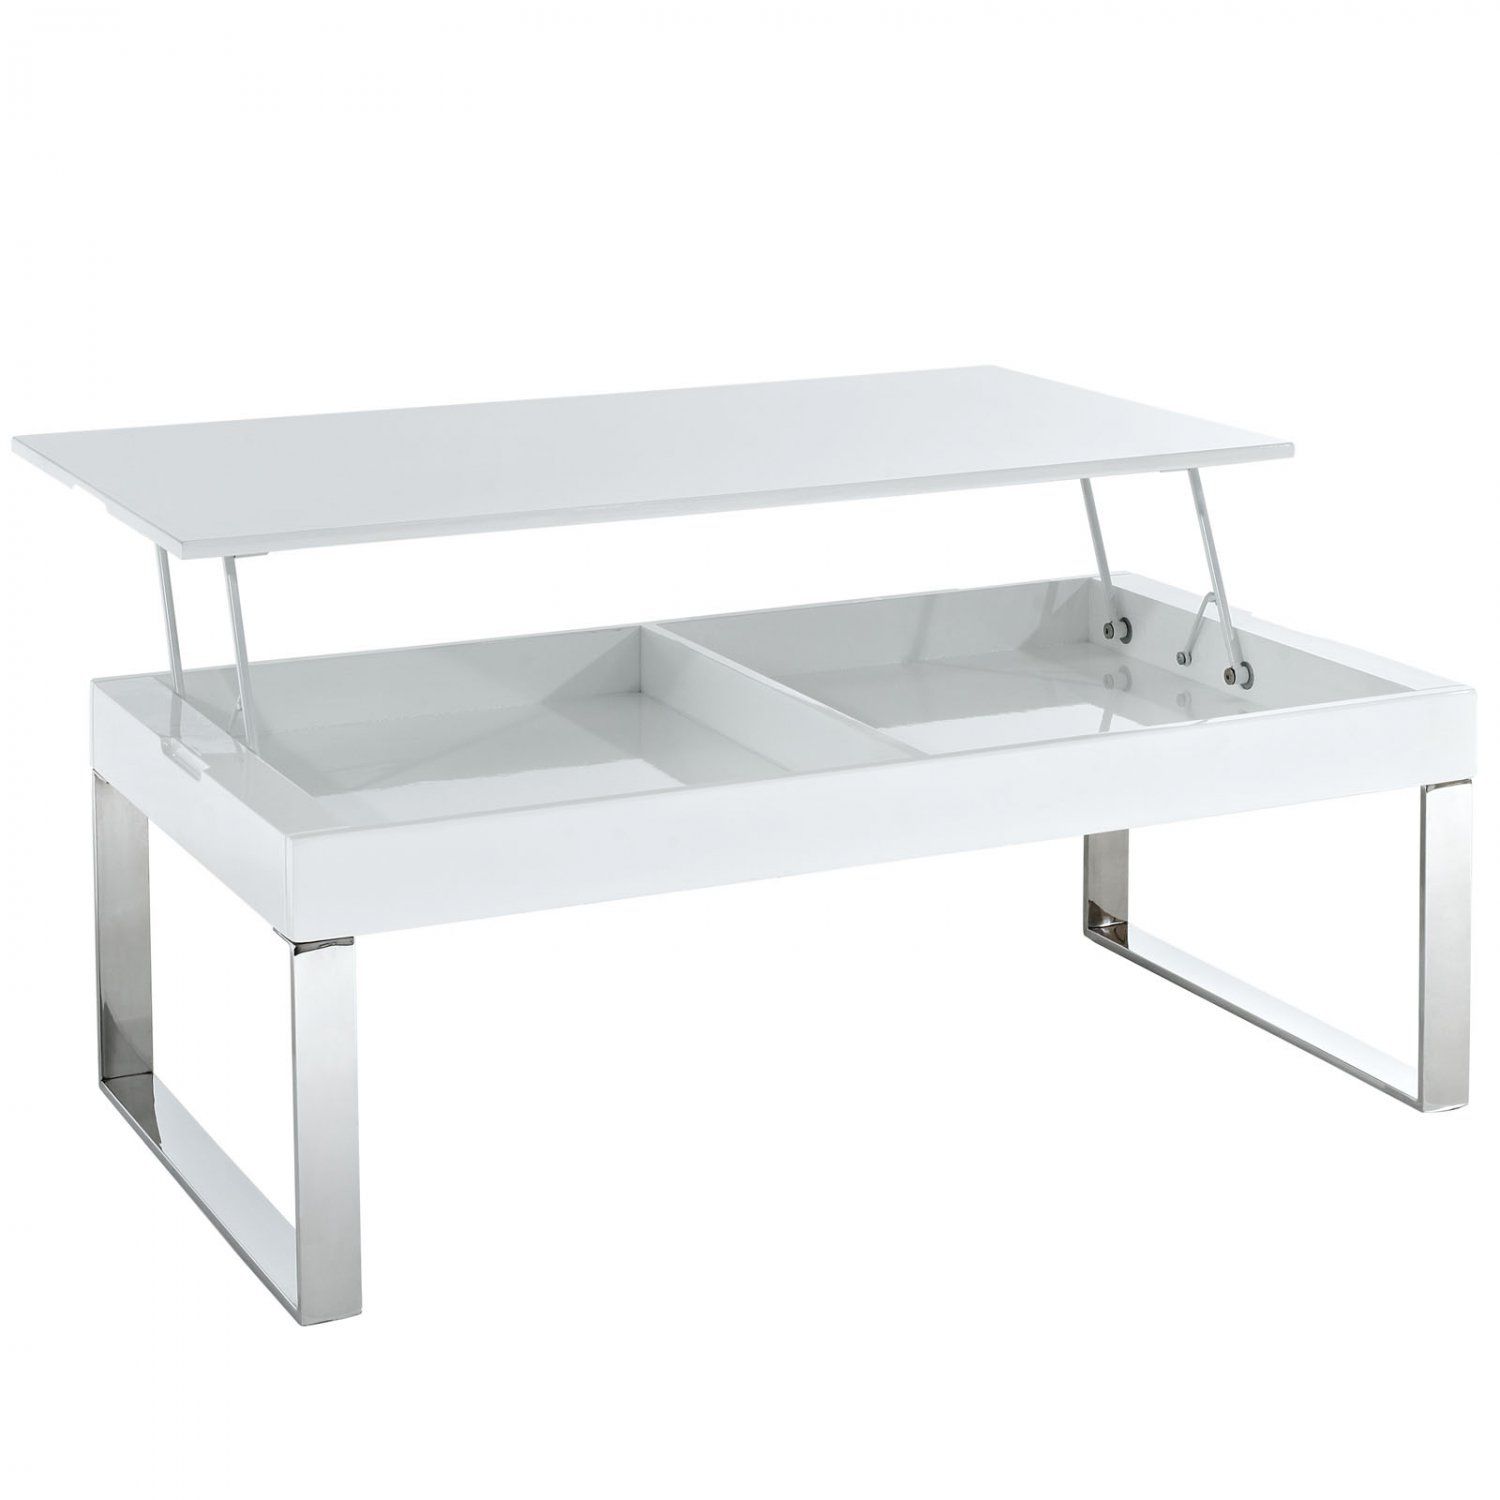 White Gloss Lift Coffee Table With Regard To High Gloss Lift Top Coffee Tables (View 8 of 15)